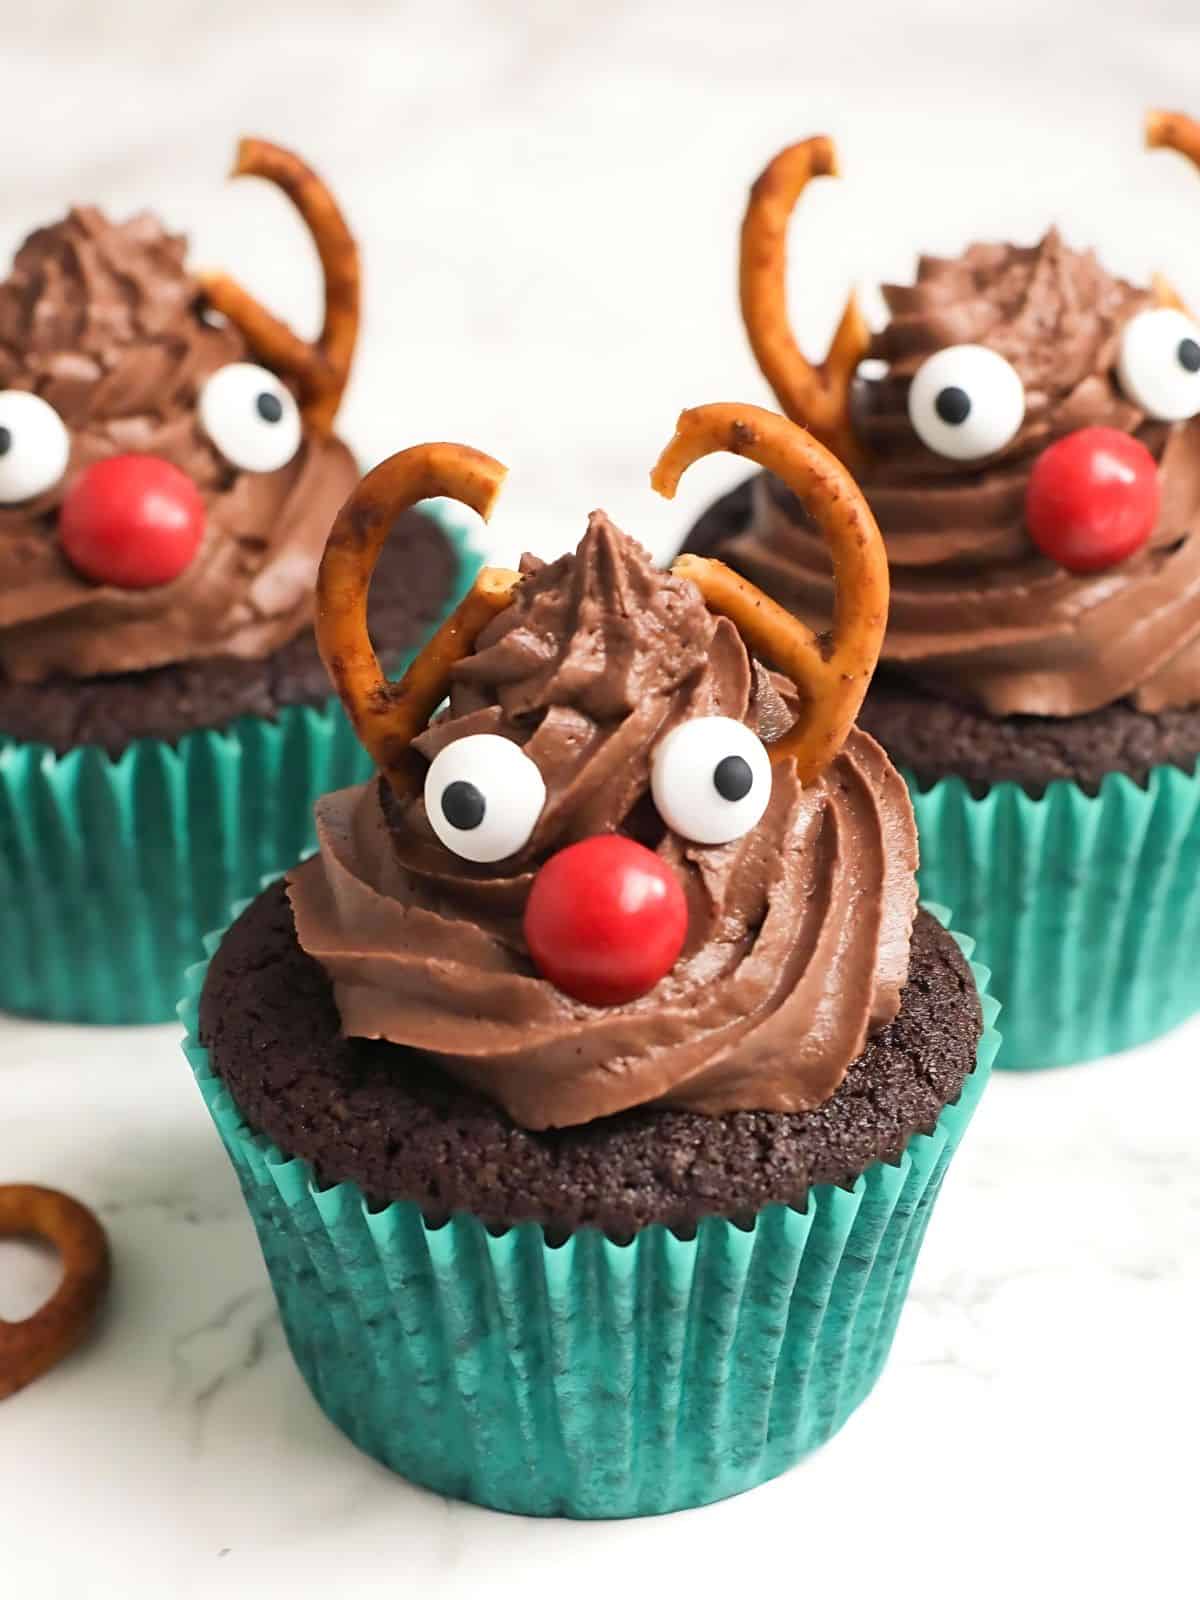 Reindeer themed cupcakes with pretzels resembling its antlers.